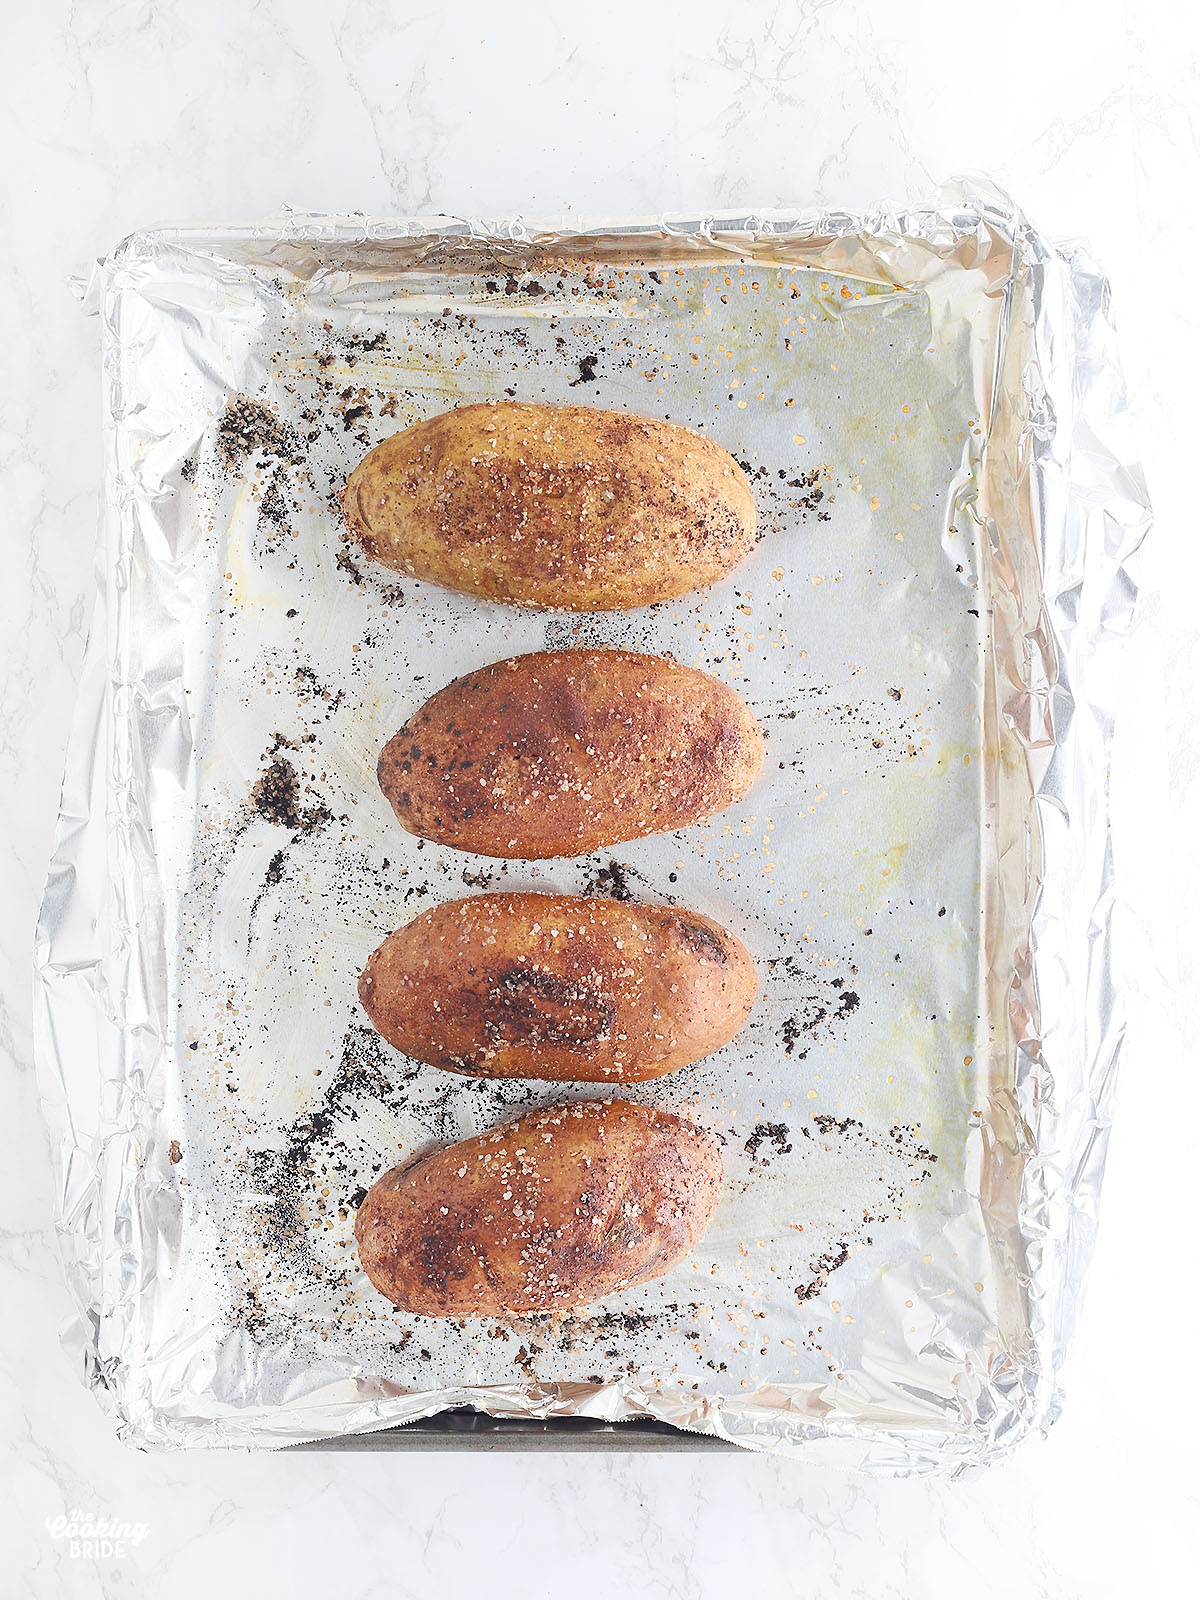 baked Russet potatoes on a foil lined baking sheet